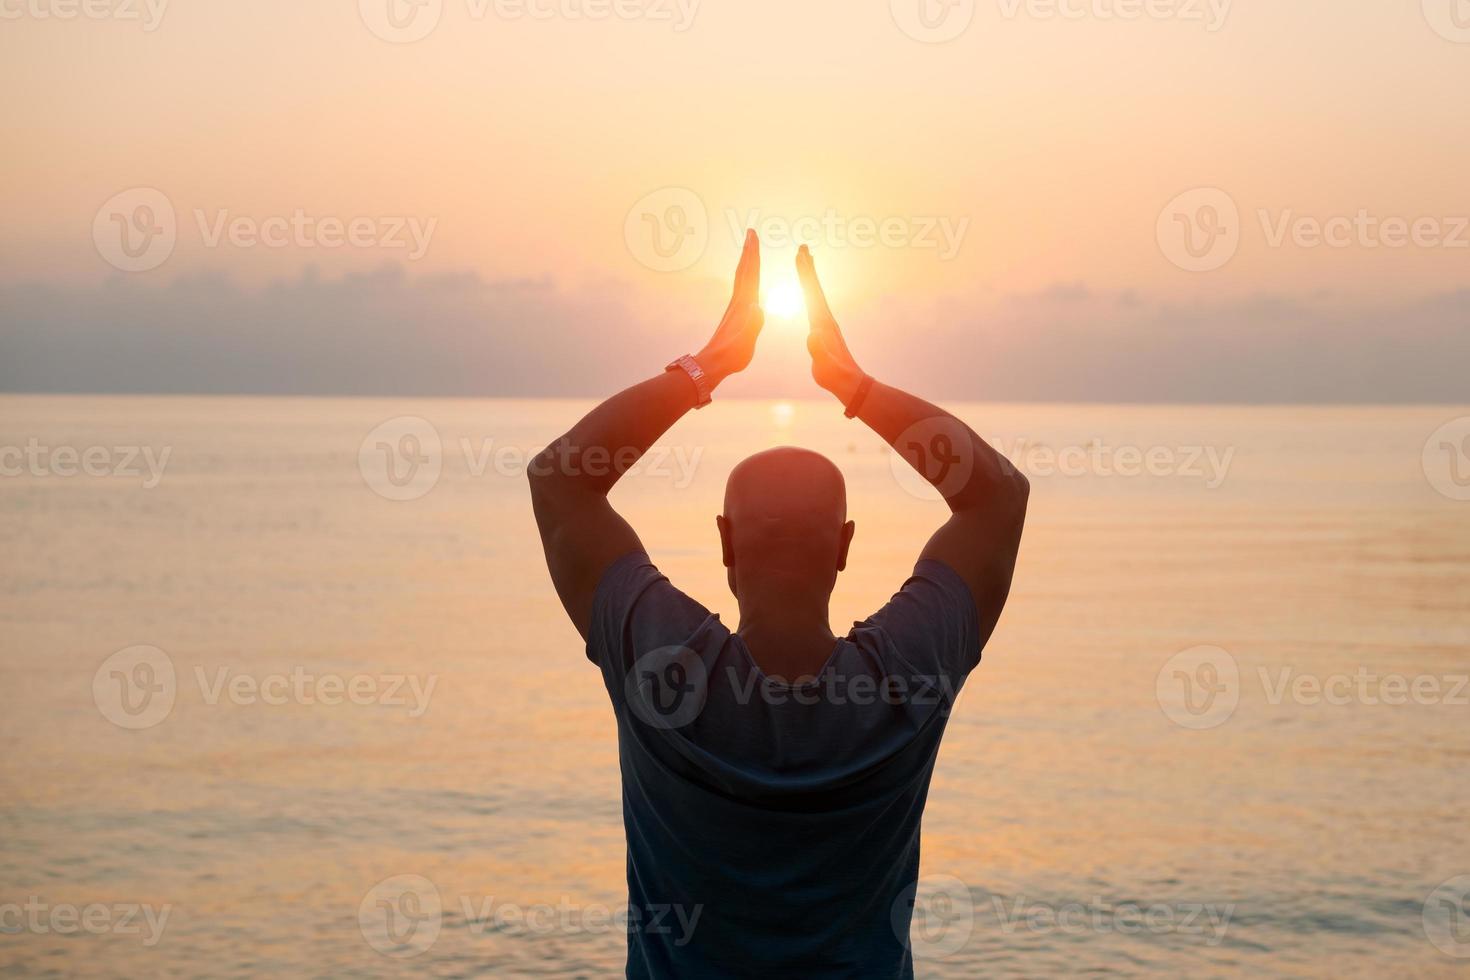 Silhouette man with his hands raised at sunset on beach arms out to sides photo